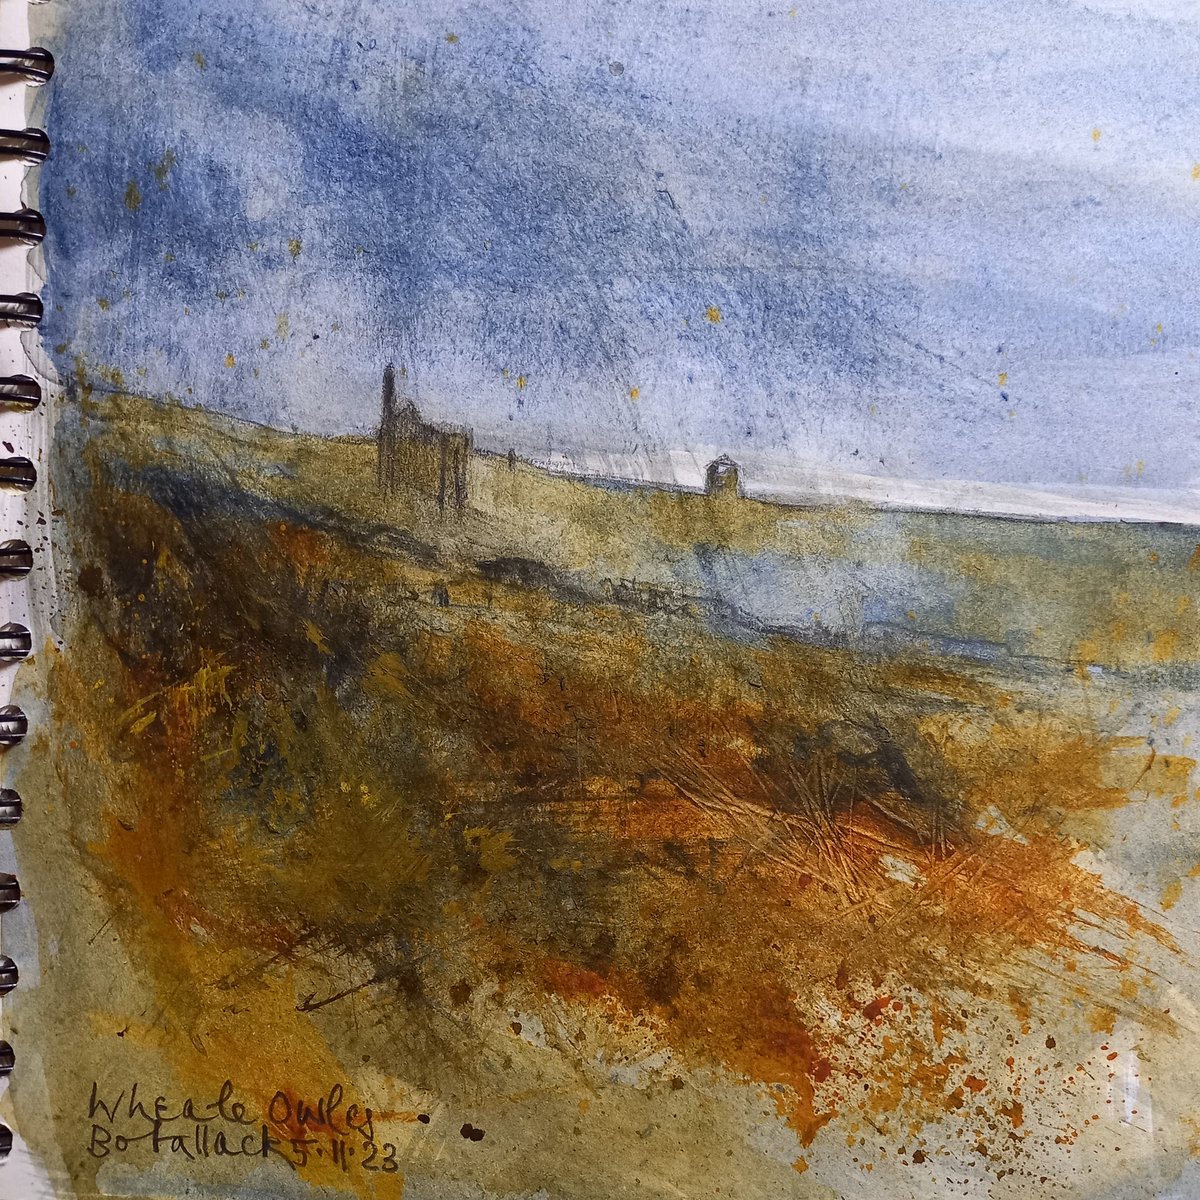 A spot of wuthering weather has done me a power of good.

#sketching #drawing #charcoalpencil #acrylicwash

 #WhealOwles #TinMines #Botallack #WestPenwith #Cornwall #landscapeartist